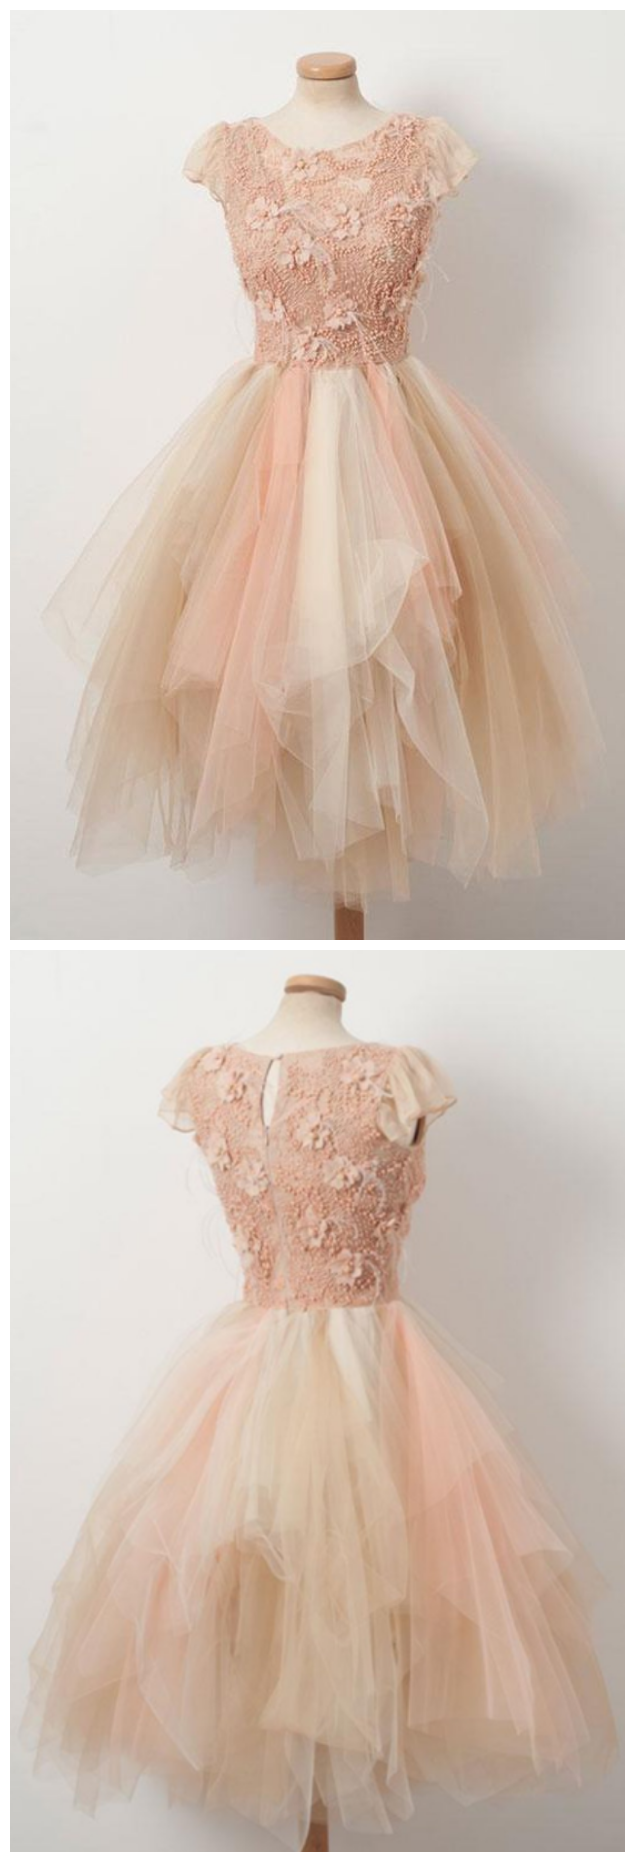 Champagne Tulle Beaded ,short Homecoming Dress, Short Summer Prom Dress With Sleeves,sexy Formal Evening Dress,custom Made